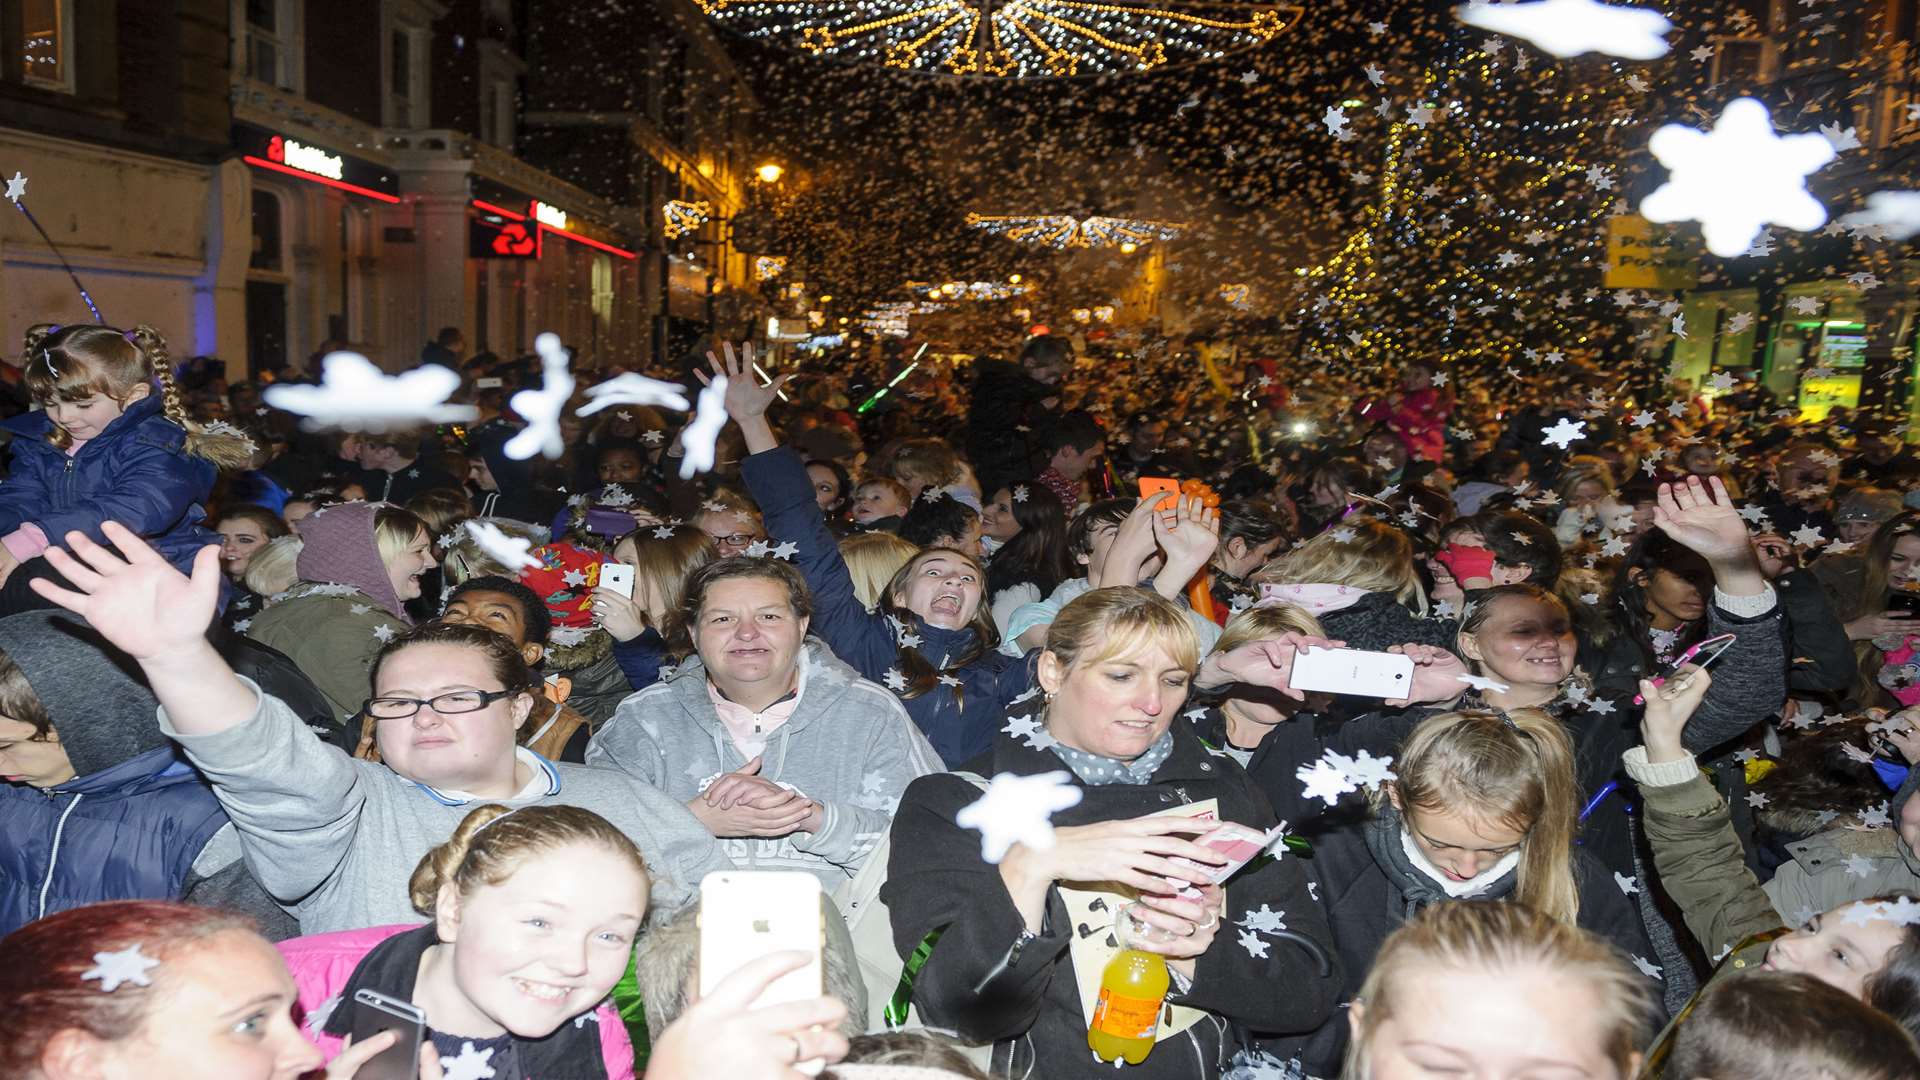 Snowflakes in the high street. Christmas lights 2015 switch-on, in High Street, Dartford.